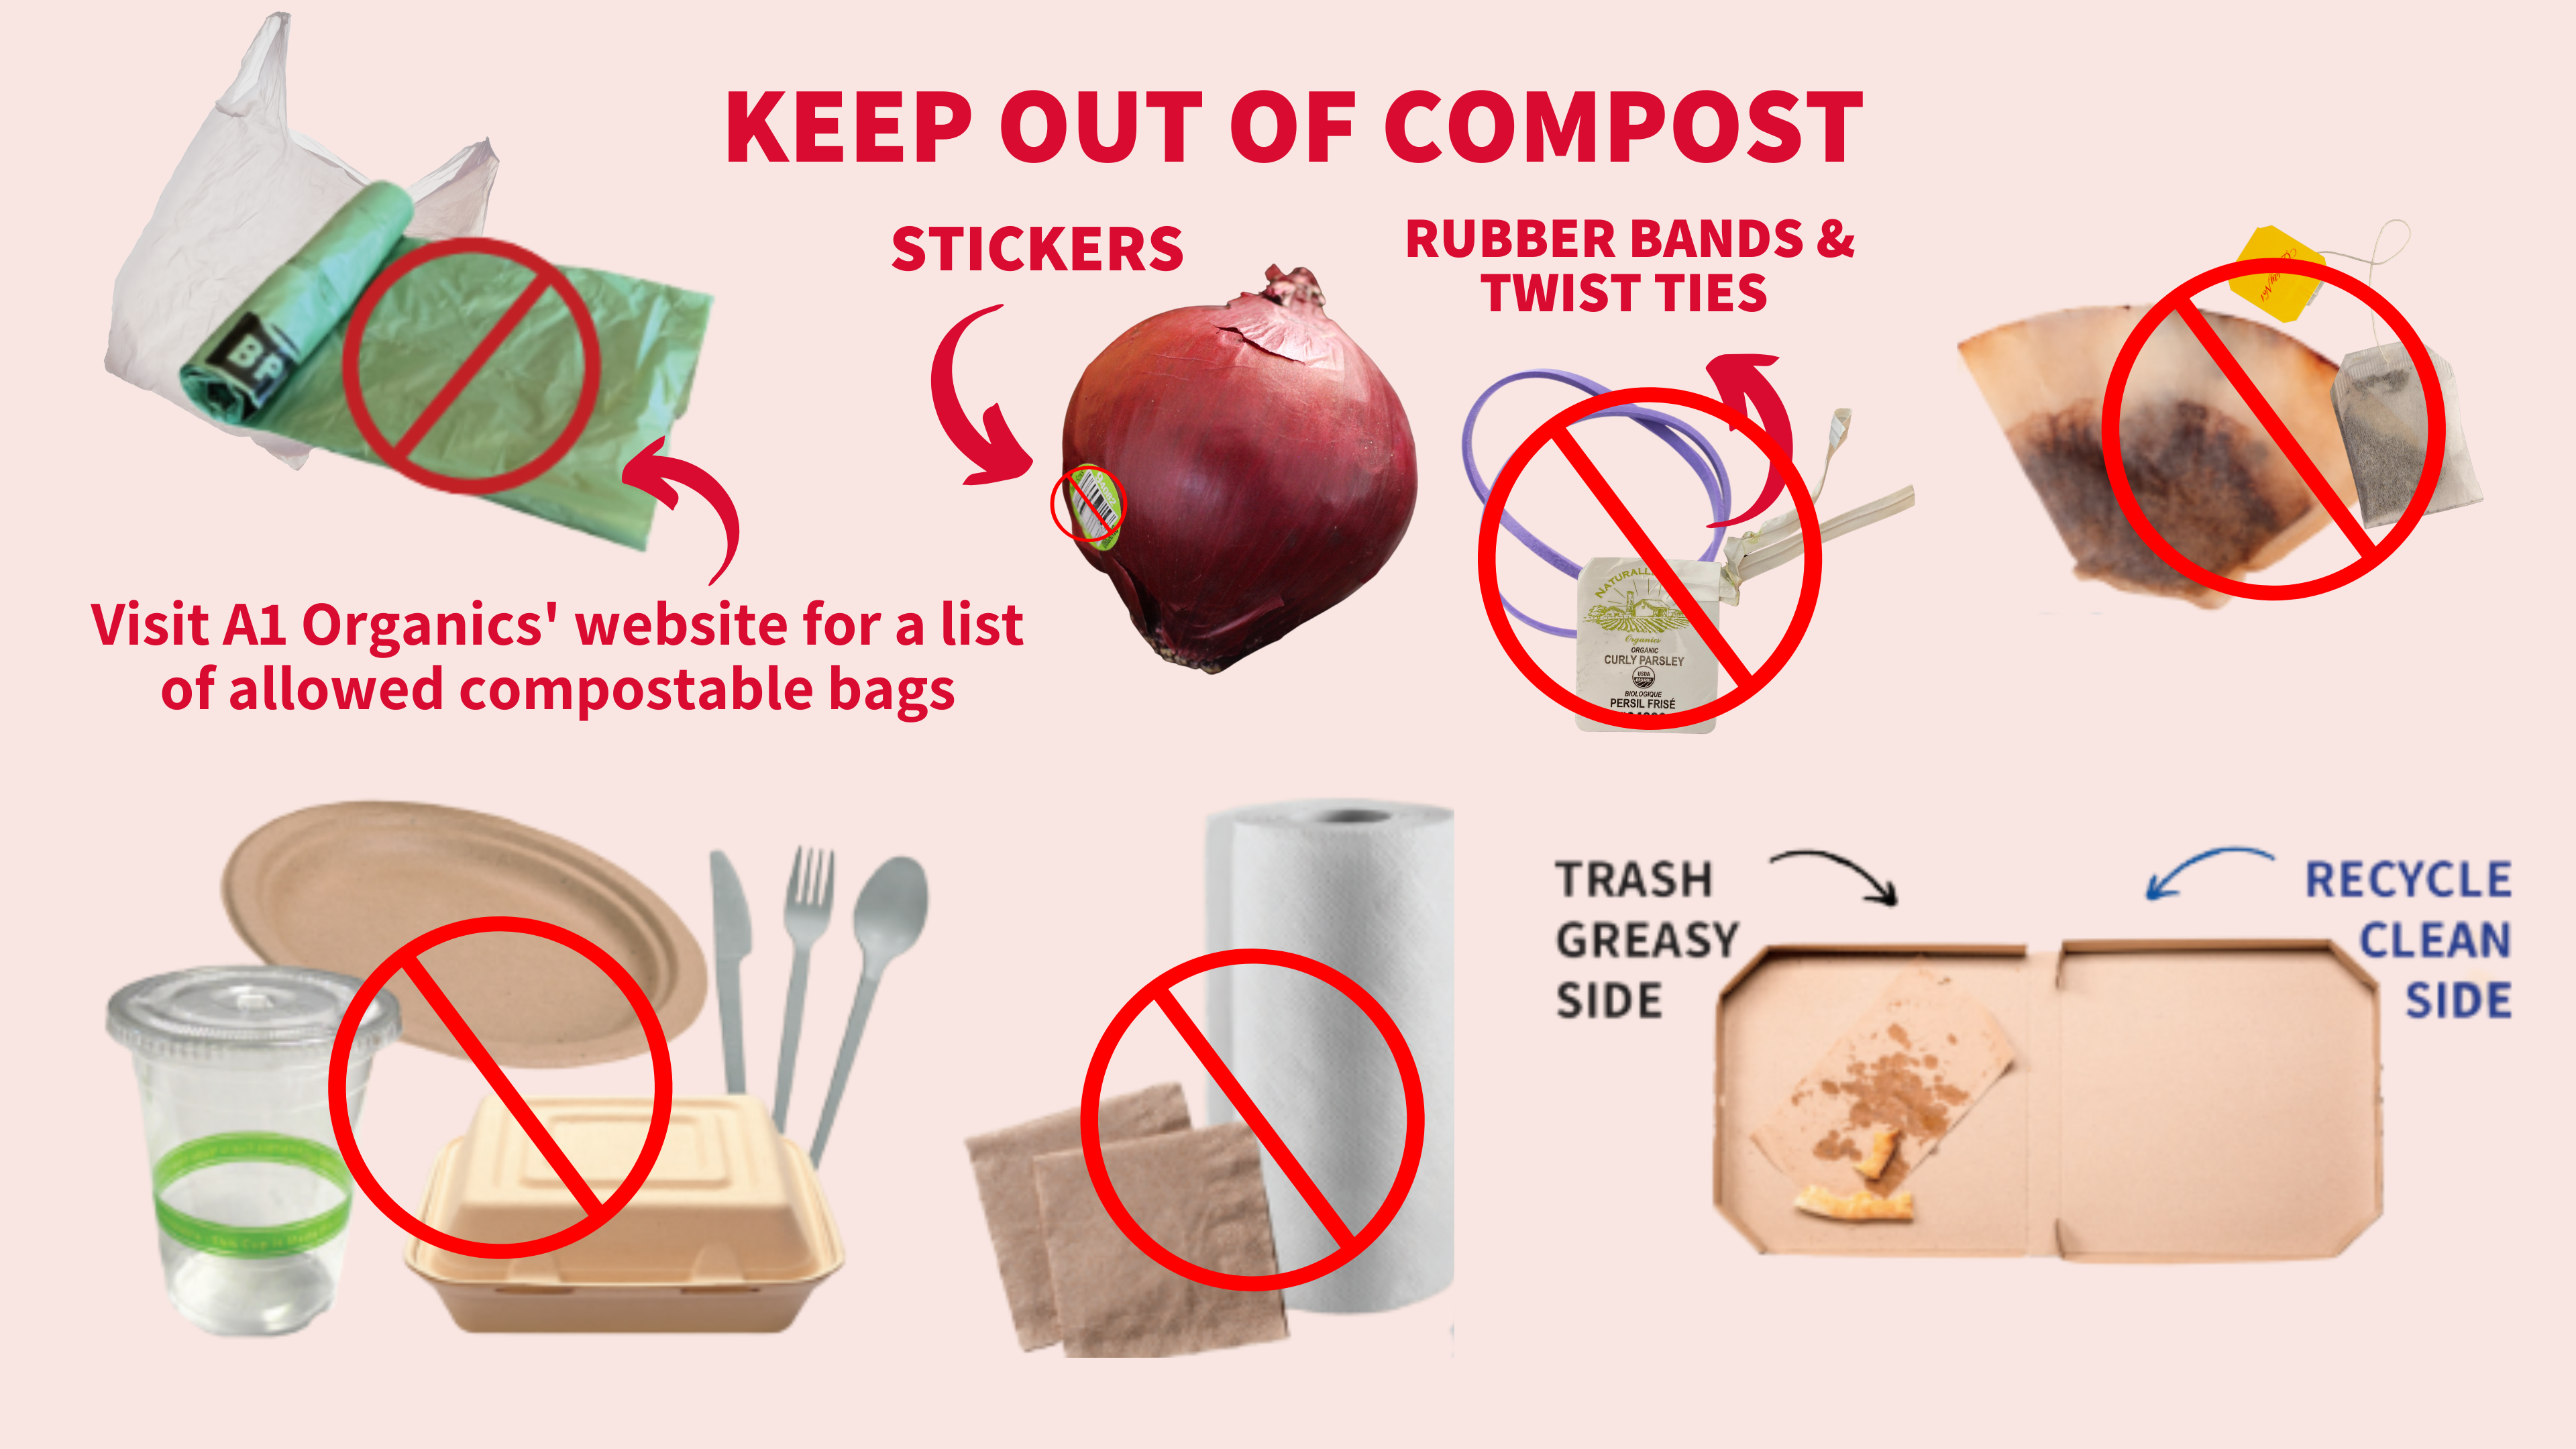 Don't put compostable products, stickers, rubber bands, paper products and pizza boxes in the compost.